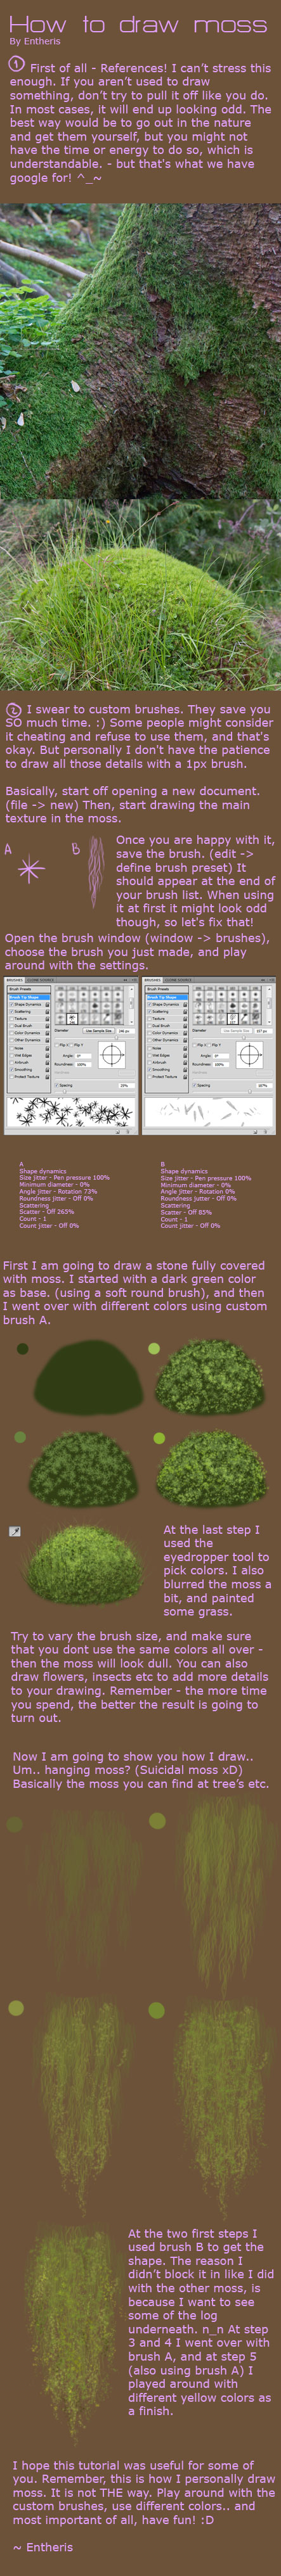 How to draw moss by Entheris on DeviantArt